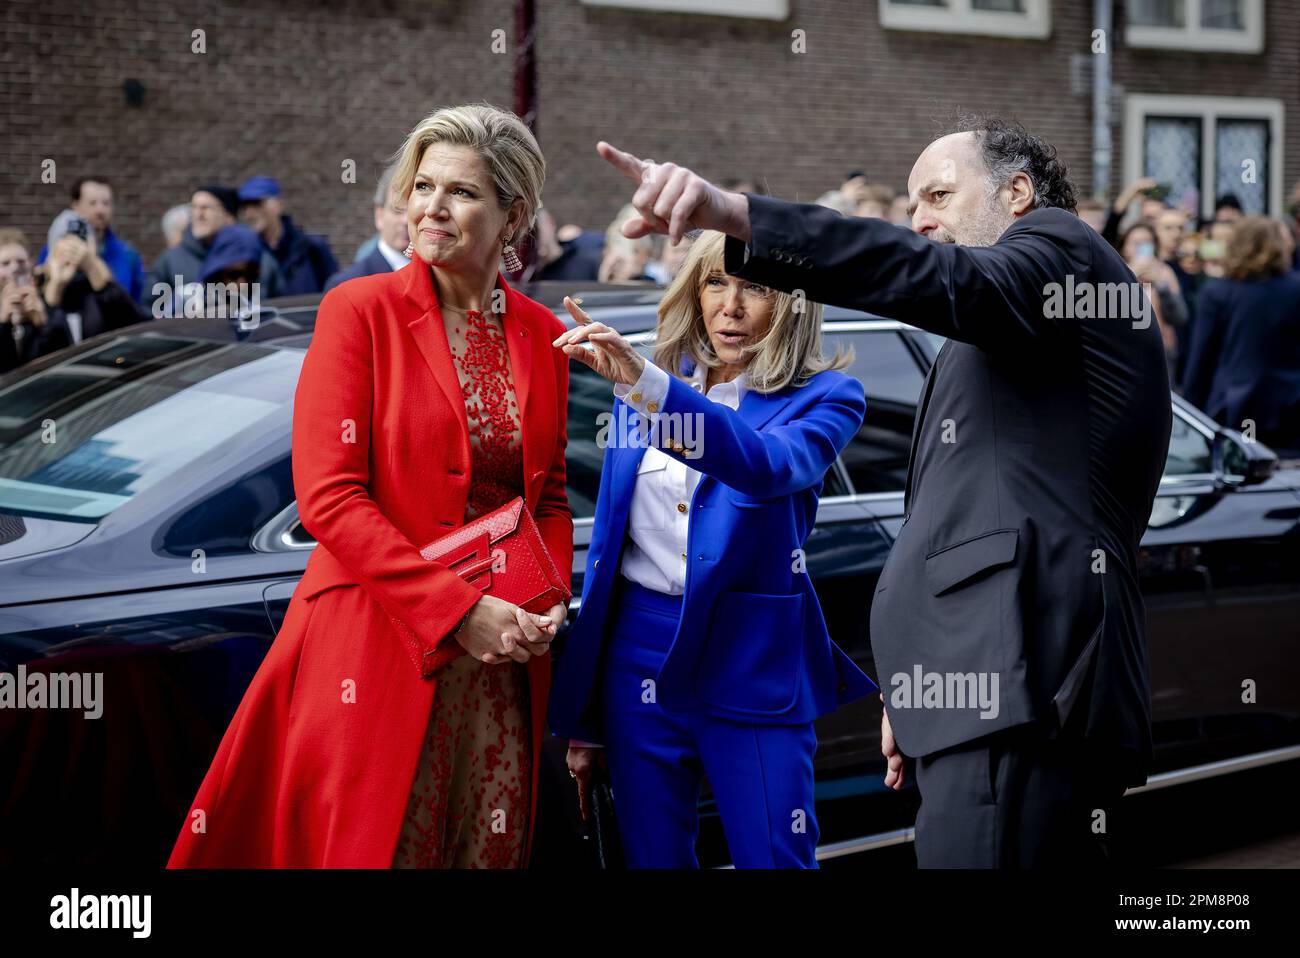 Amsterdam, Netherlands. 12th April, 2023. AMSTERDAM - The French first lady Brigitte Macron (m) and Queen Maxima visit the Anne Frank House. The French presidential couple is paying a two-day state visit to the Netherlands. ANP POOL ROBIN VAN LONKHUIJSEN netherlands out - belgium out Credit: ANP/Alamy Live News Credit: ANP/Alamy Live News Stock Photo